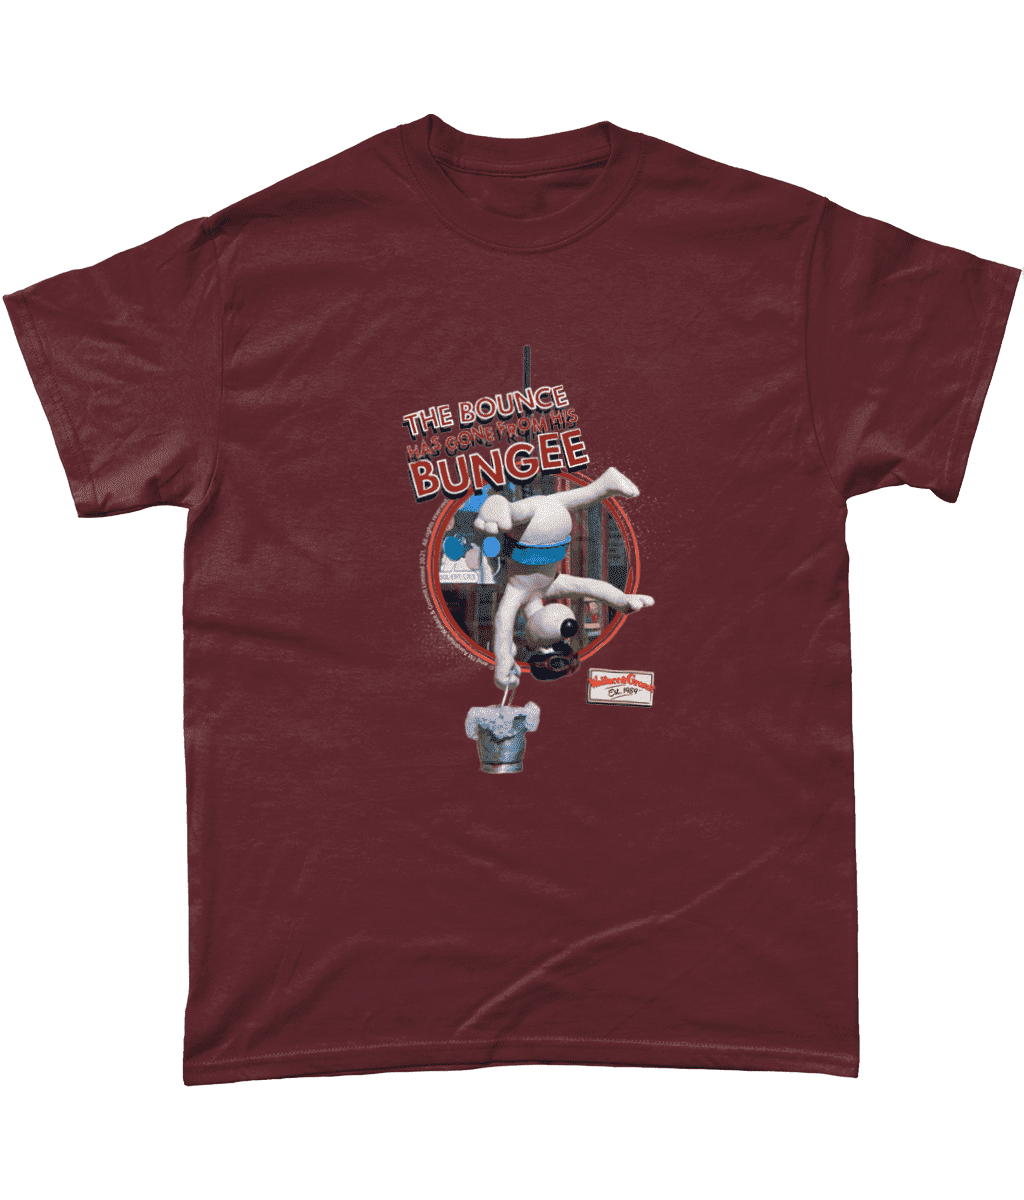 Wallace and Gromit T-Shirt Bounce Has Gone From His Bungee A Close Shave Men's Maroon